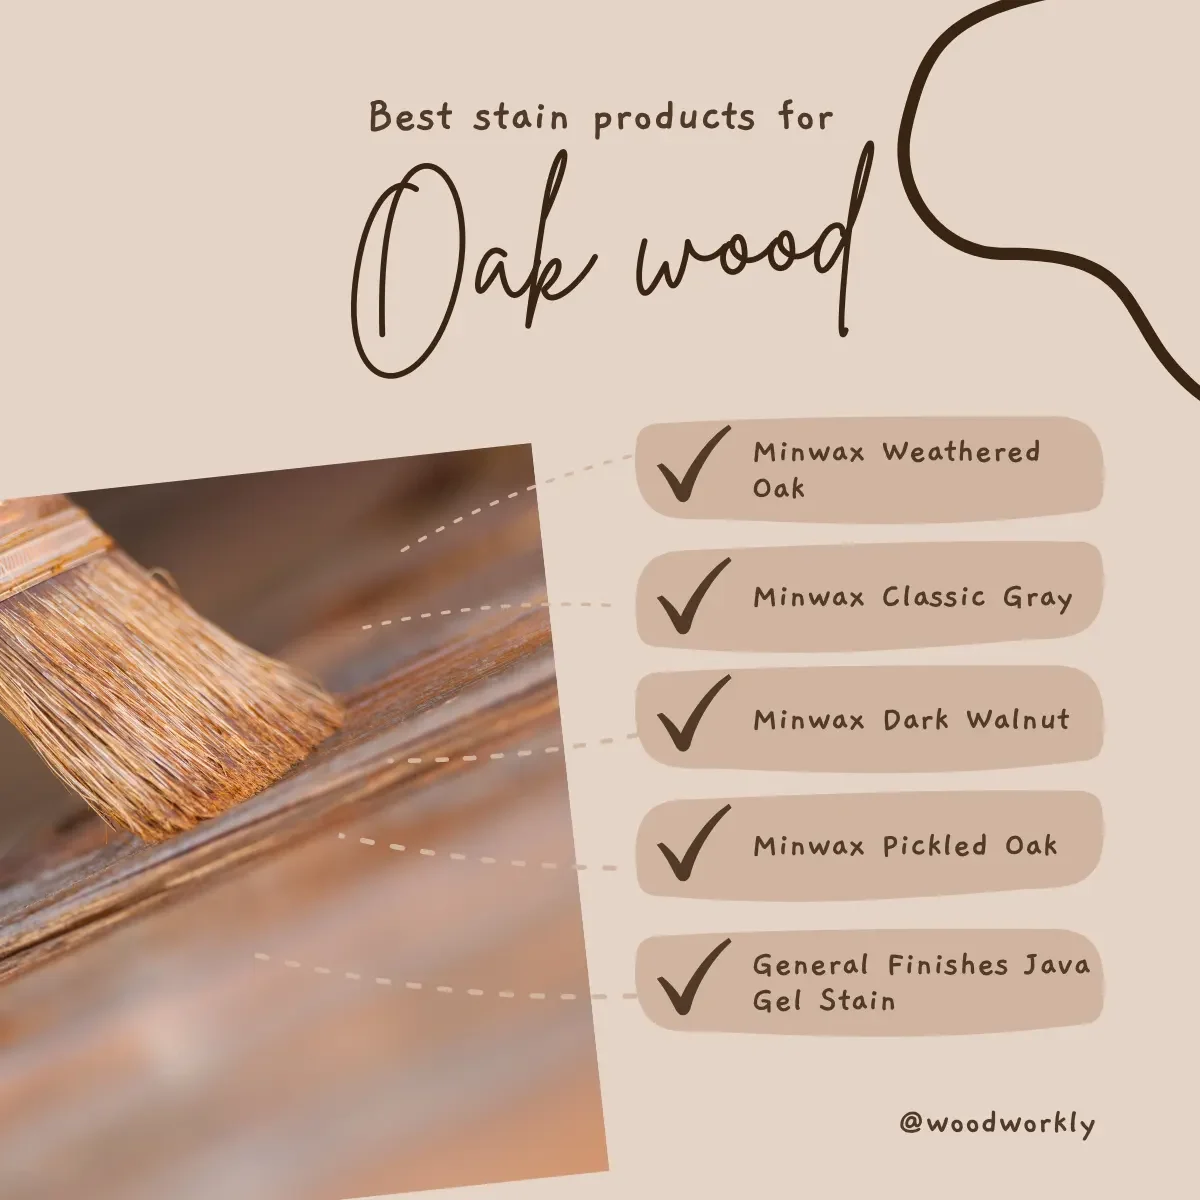 best stain products for oak wood